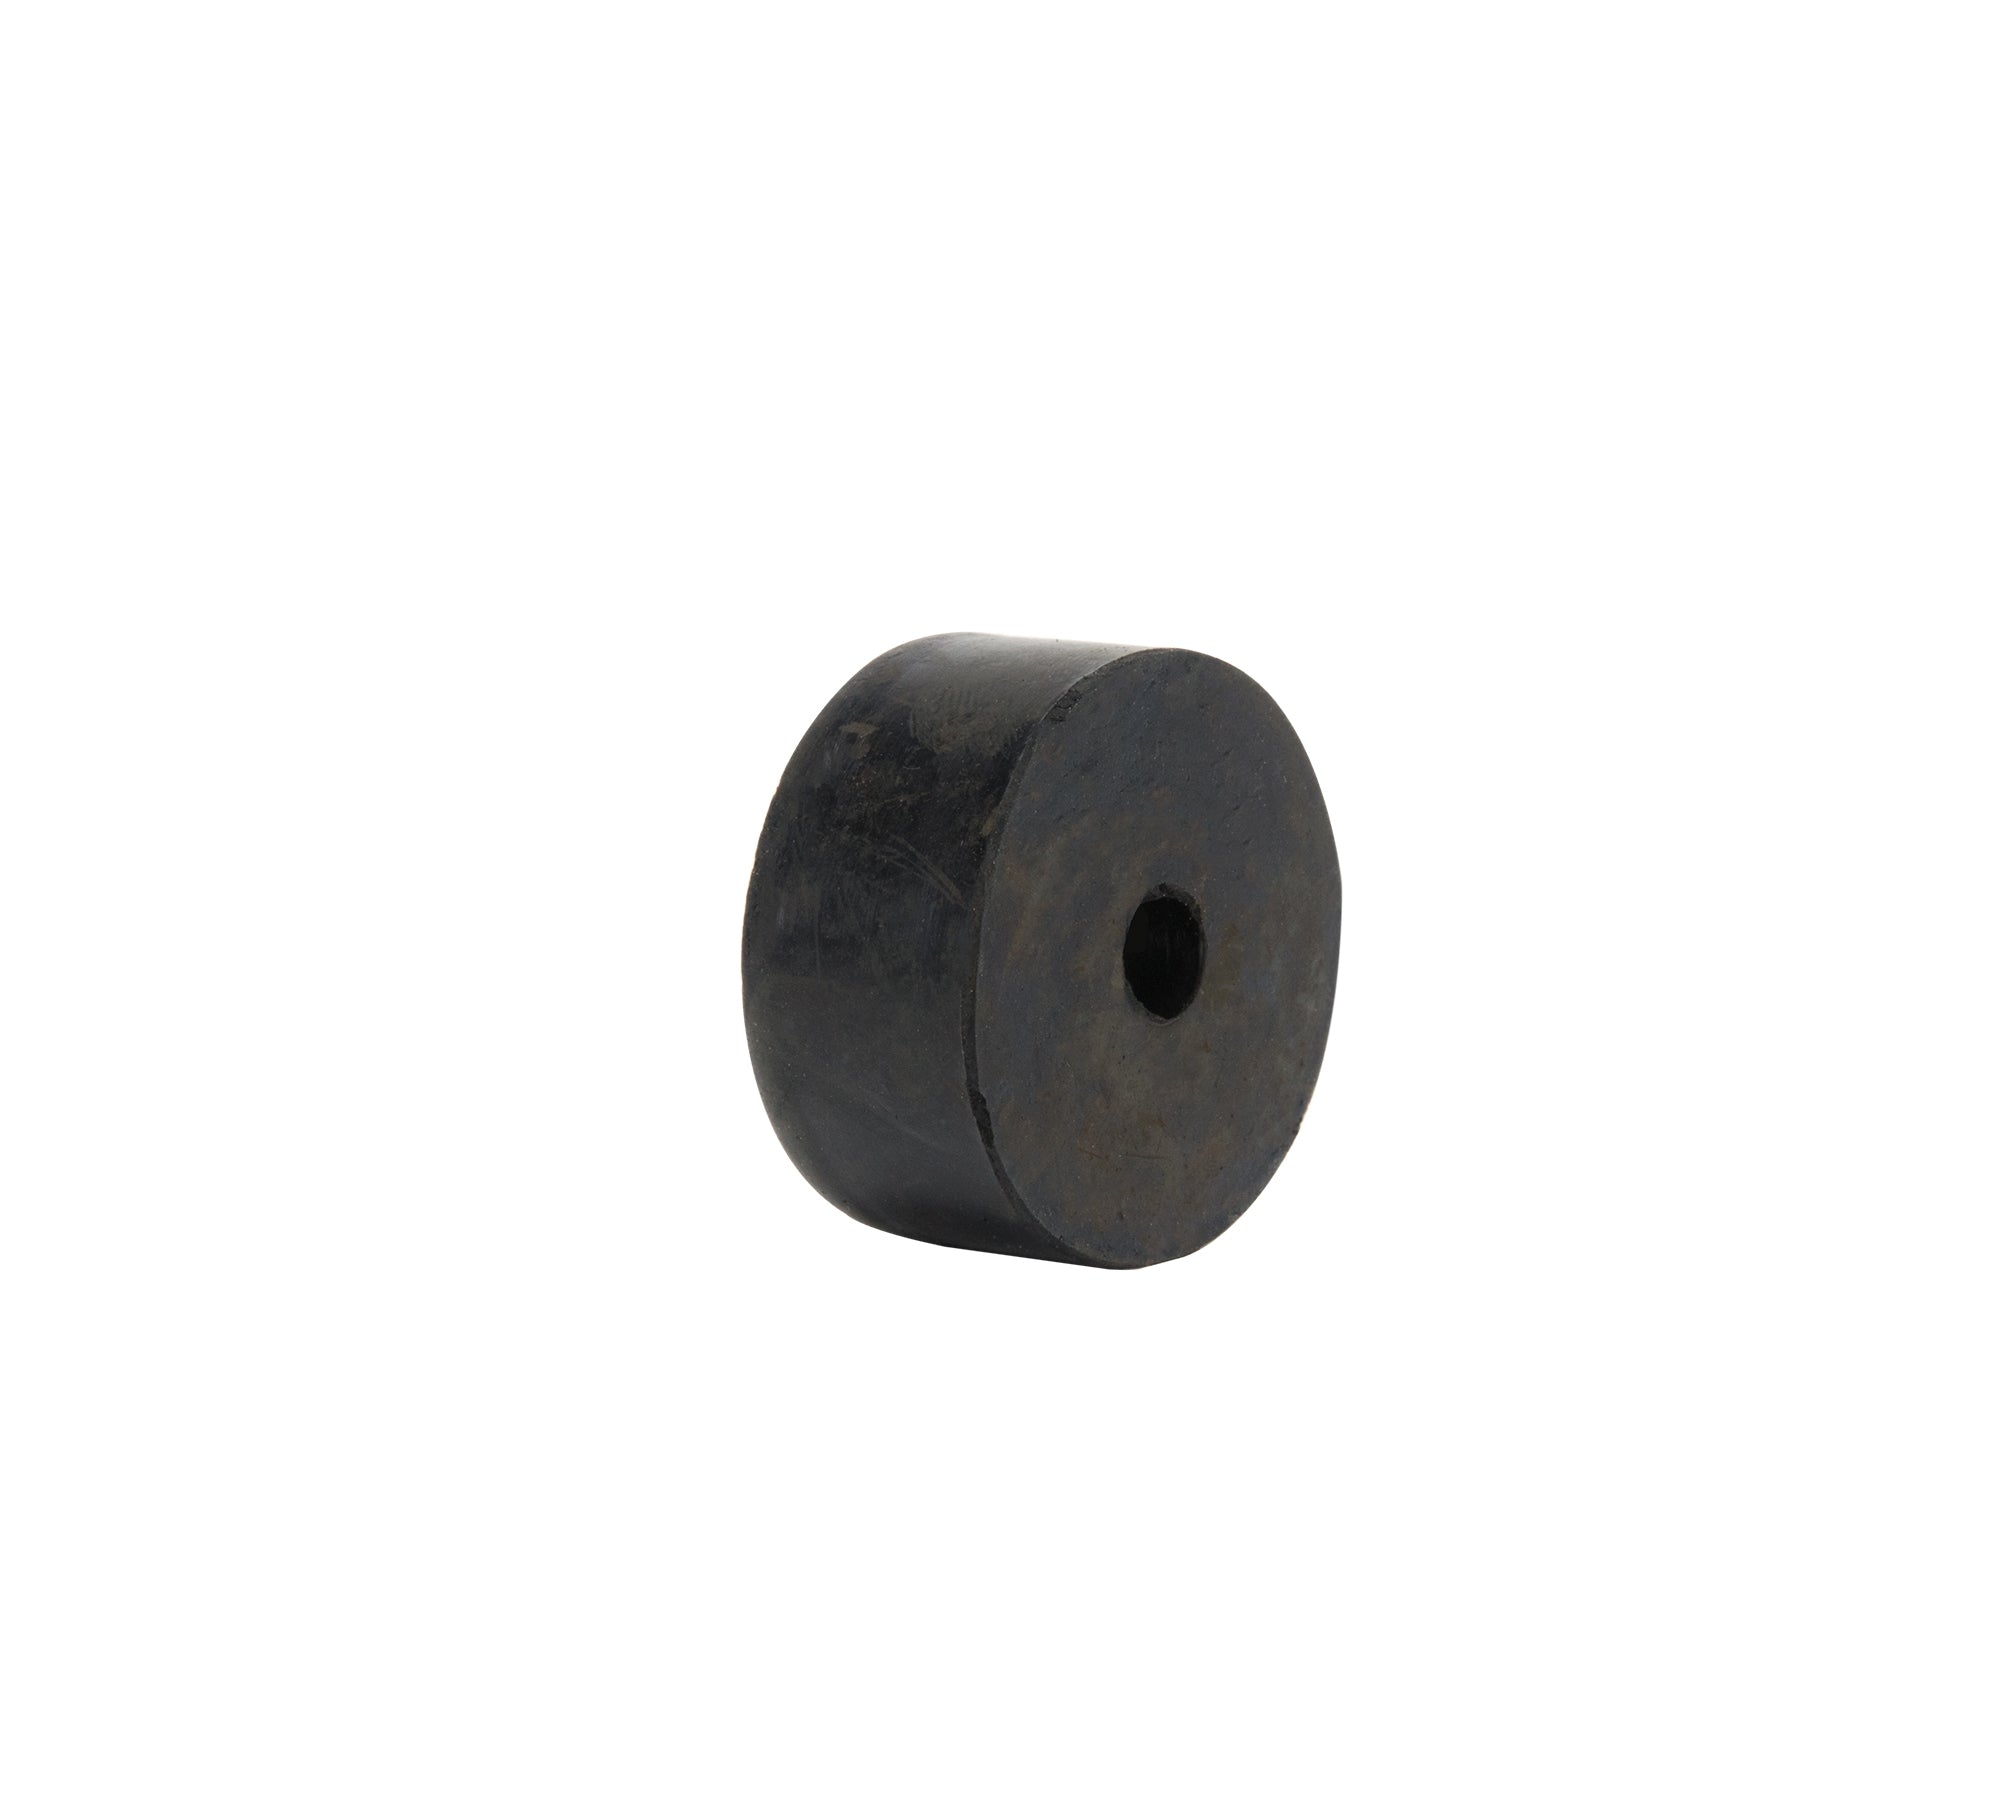 OSP ATA-RUBBER-FOOT 1.5" Diameter Rubber Foot with Steel Core, 3/4" High